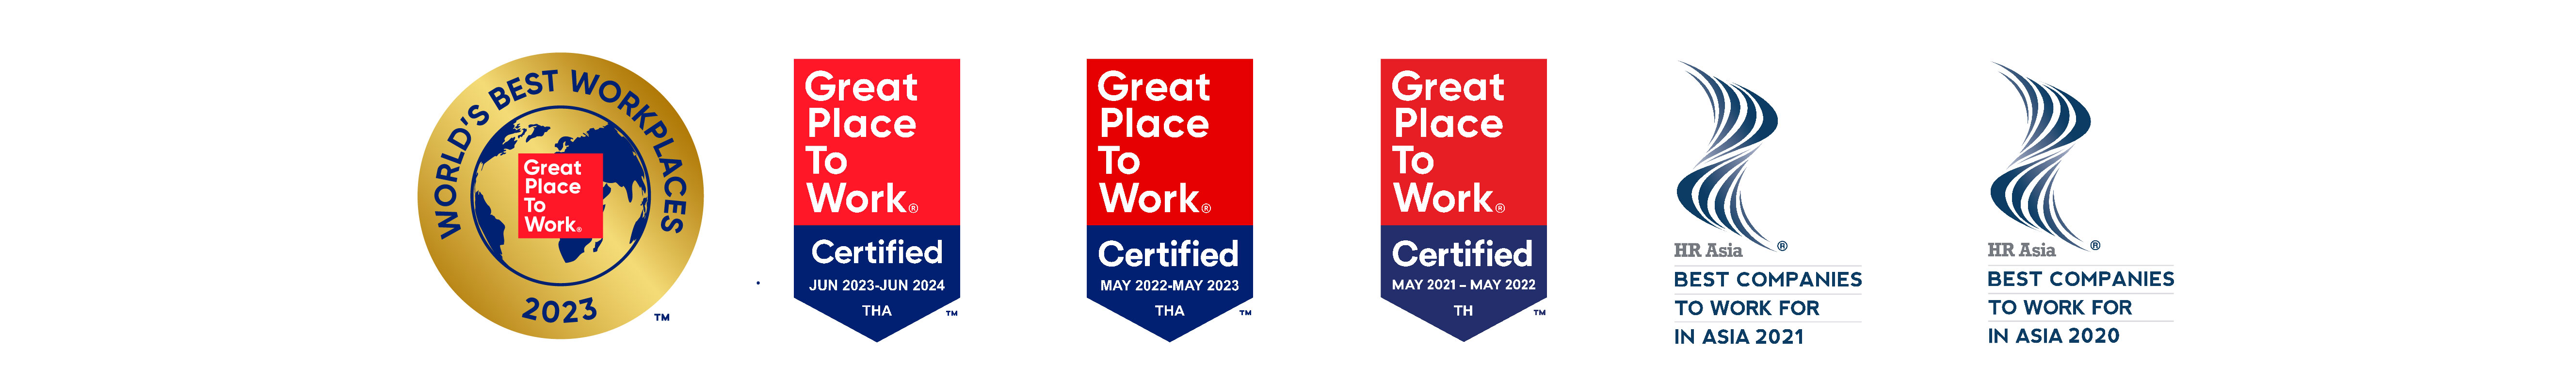 A variety of logos showing that Thoughtworks has been certified as a Great Place to Work in Thailand